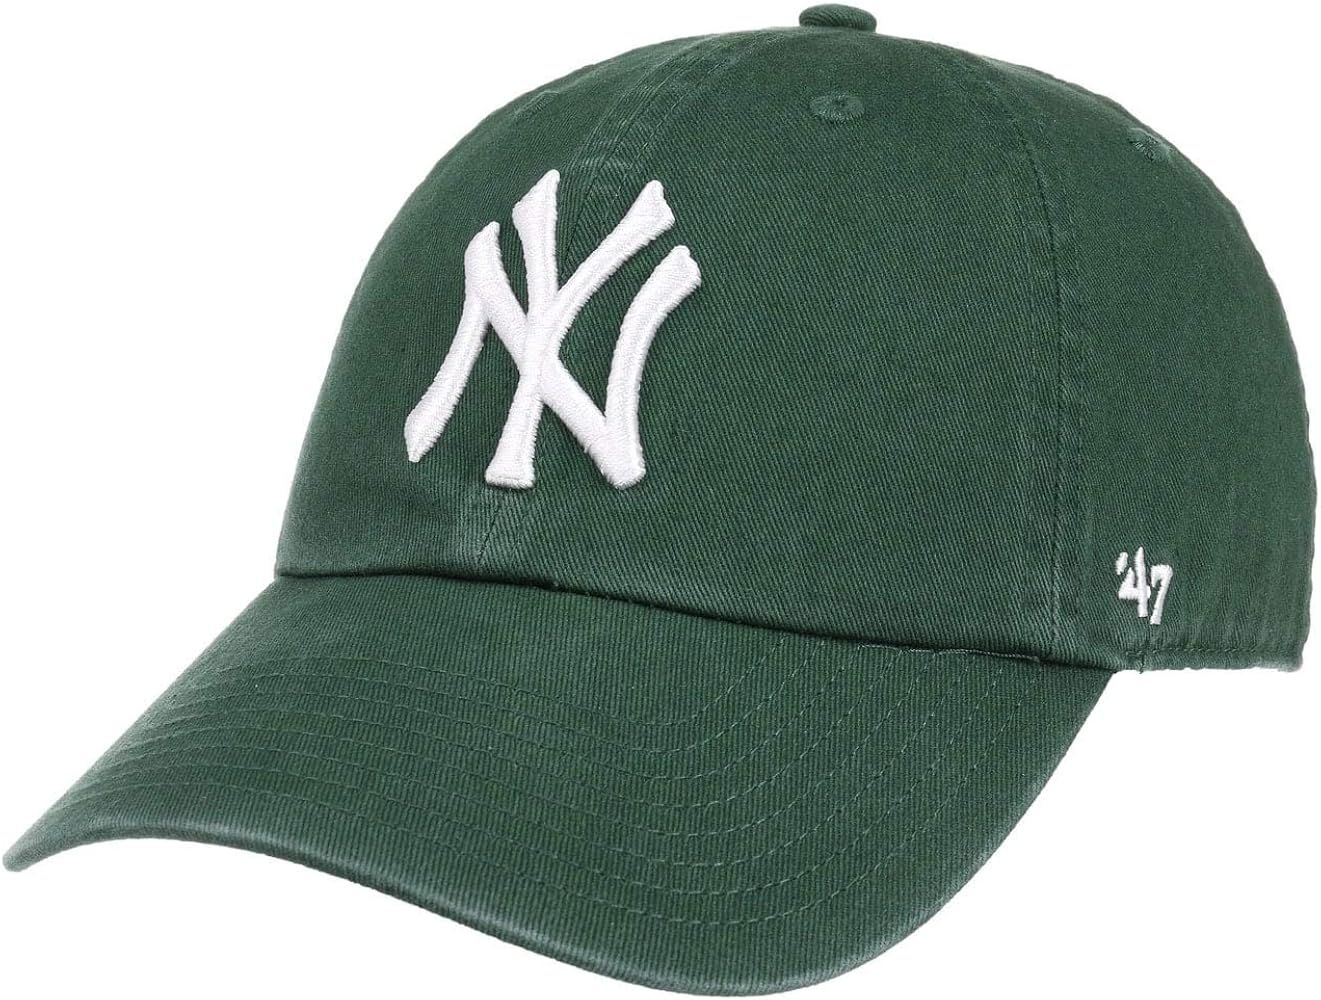 MLB Mens Men's Brand Clean Up Cap One-Size | Amazon (US)